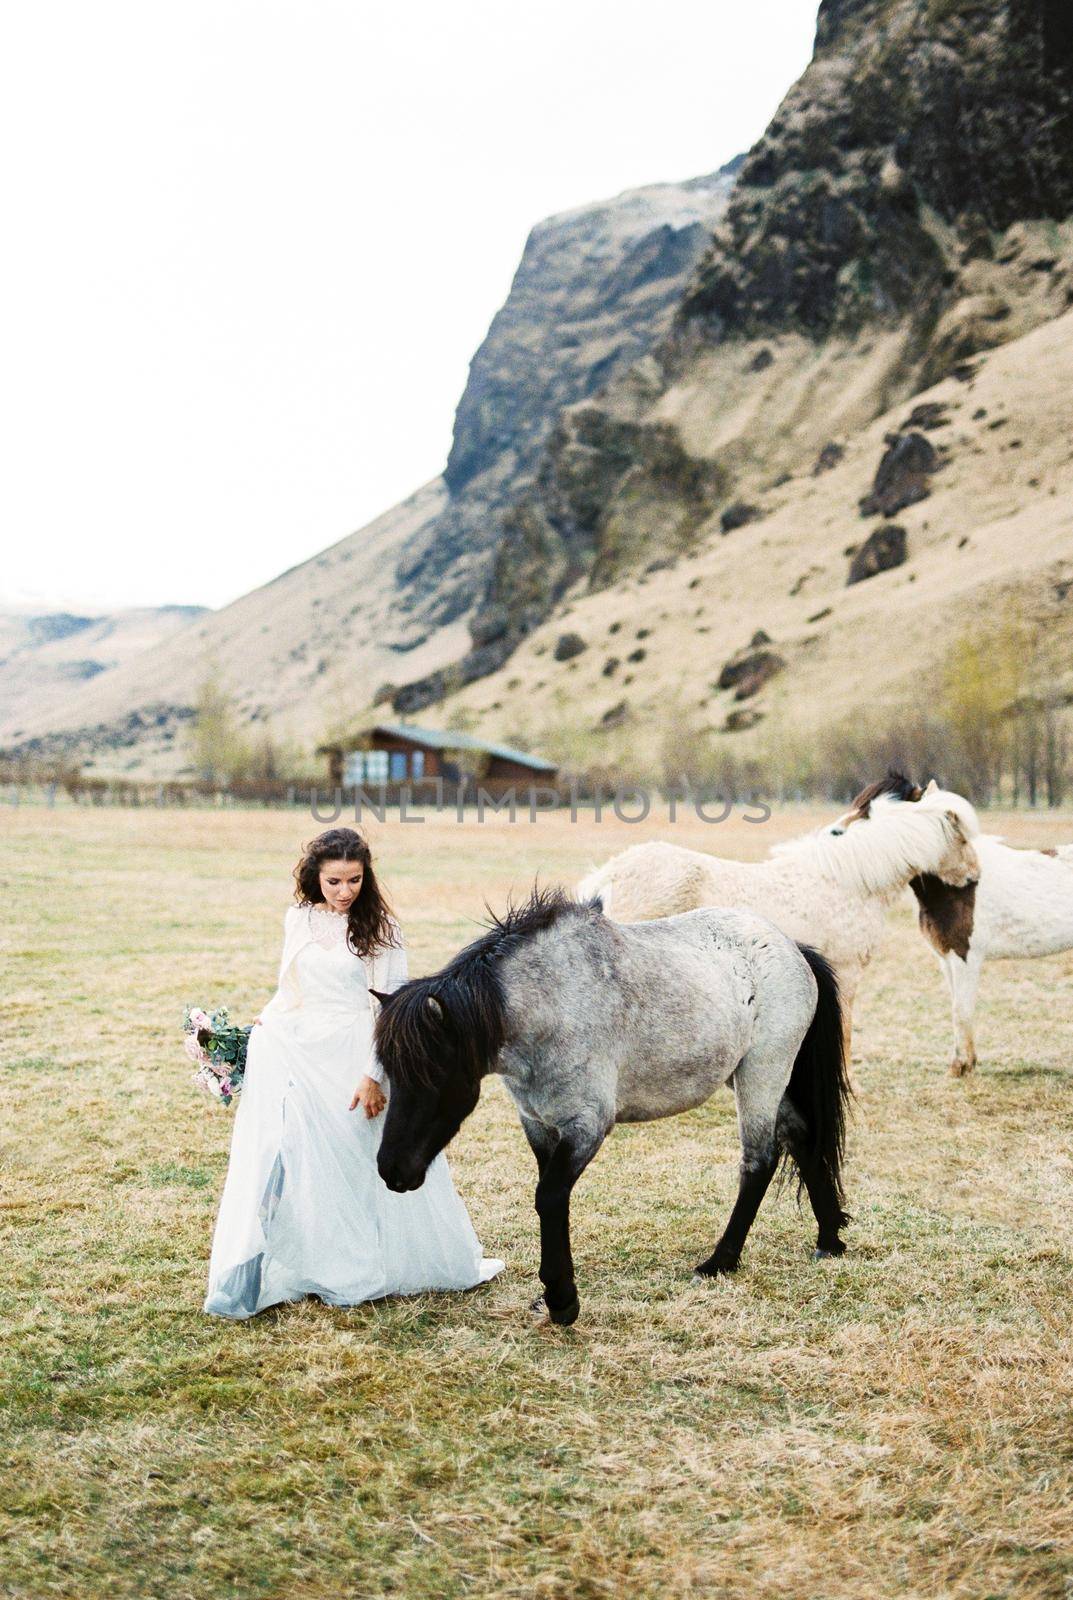 Bride with a bouquet stands near the horse in the pasture by Nadtochiy